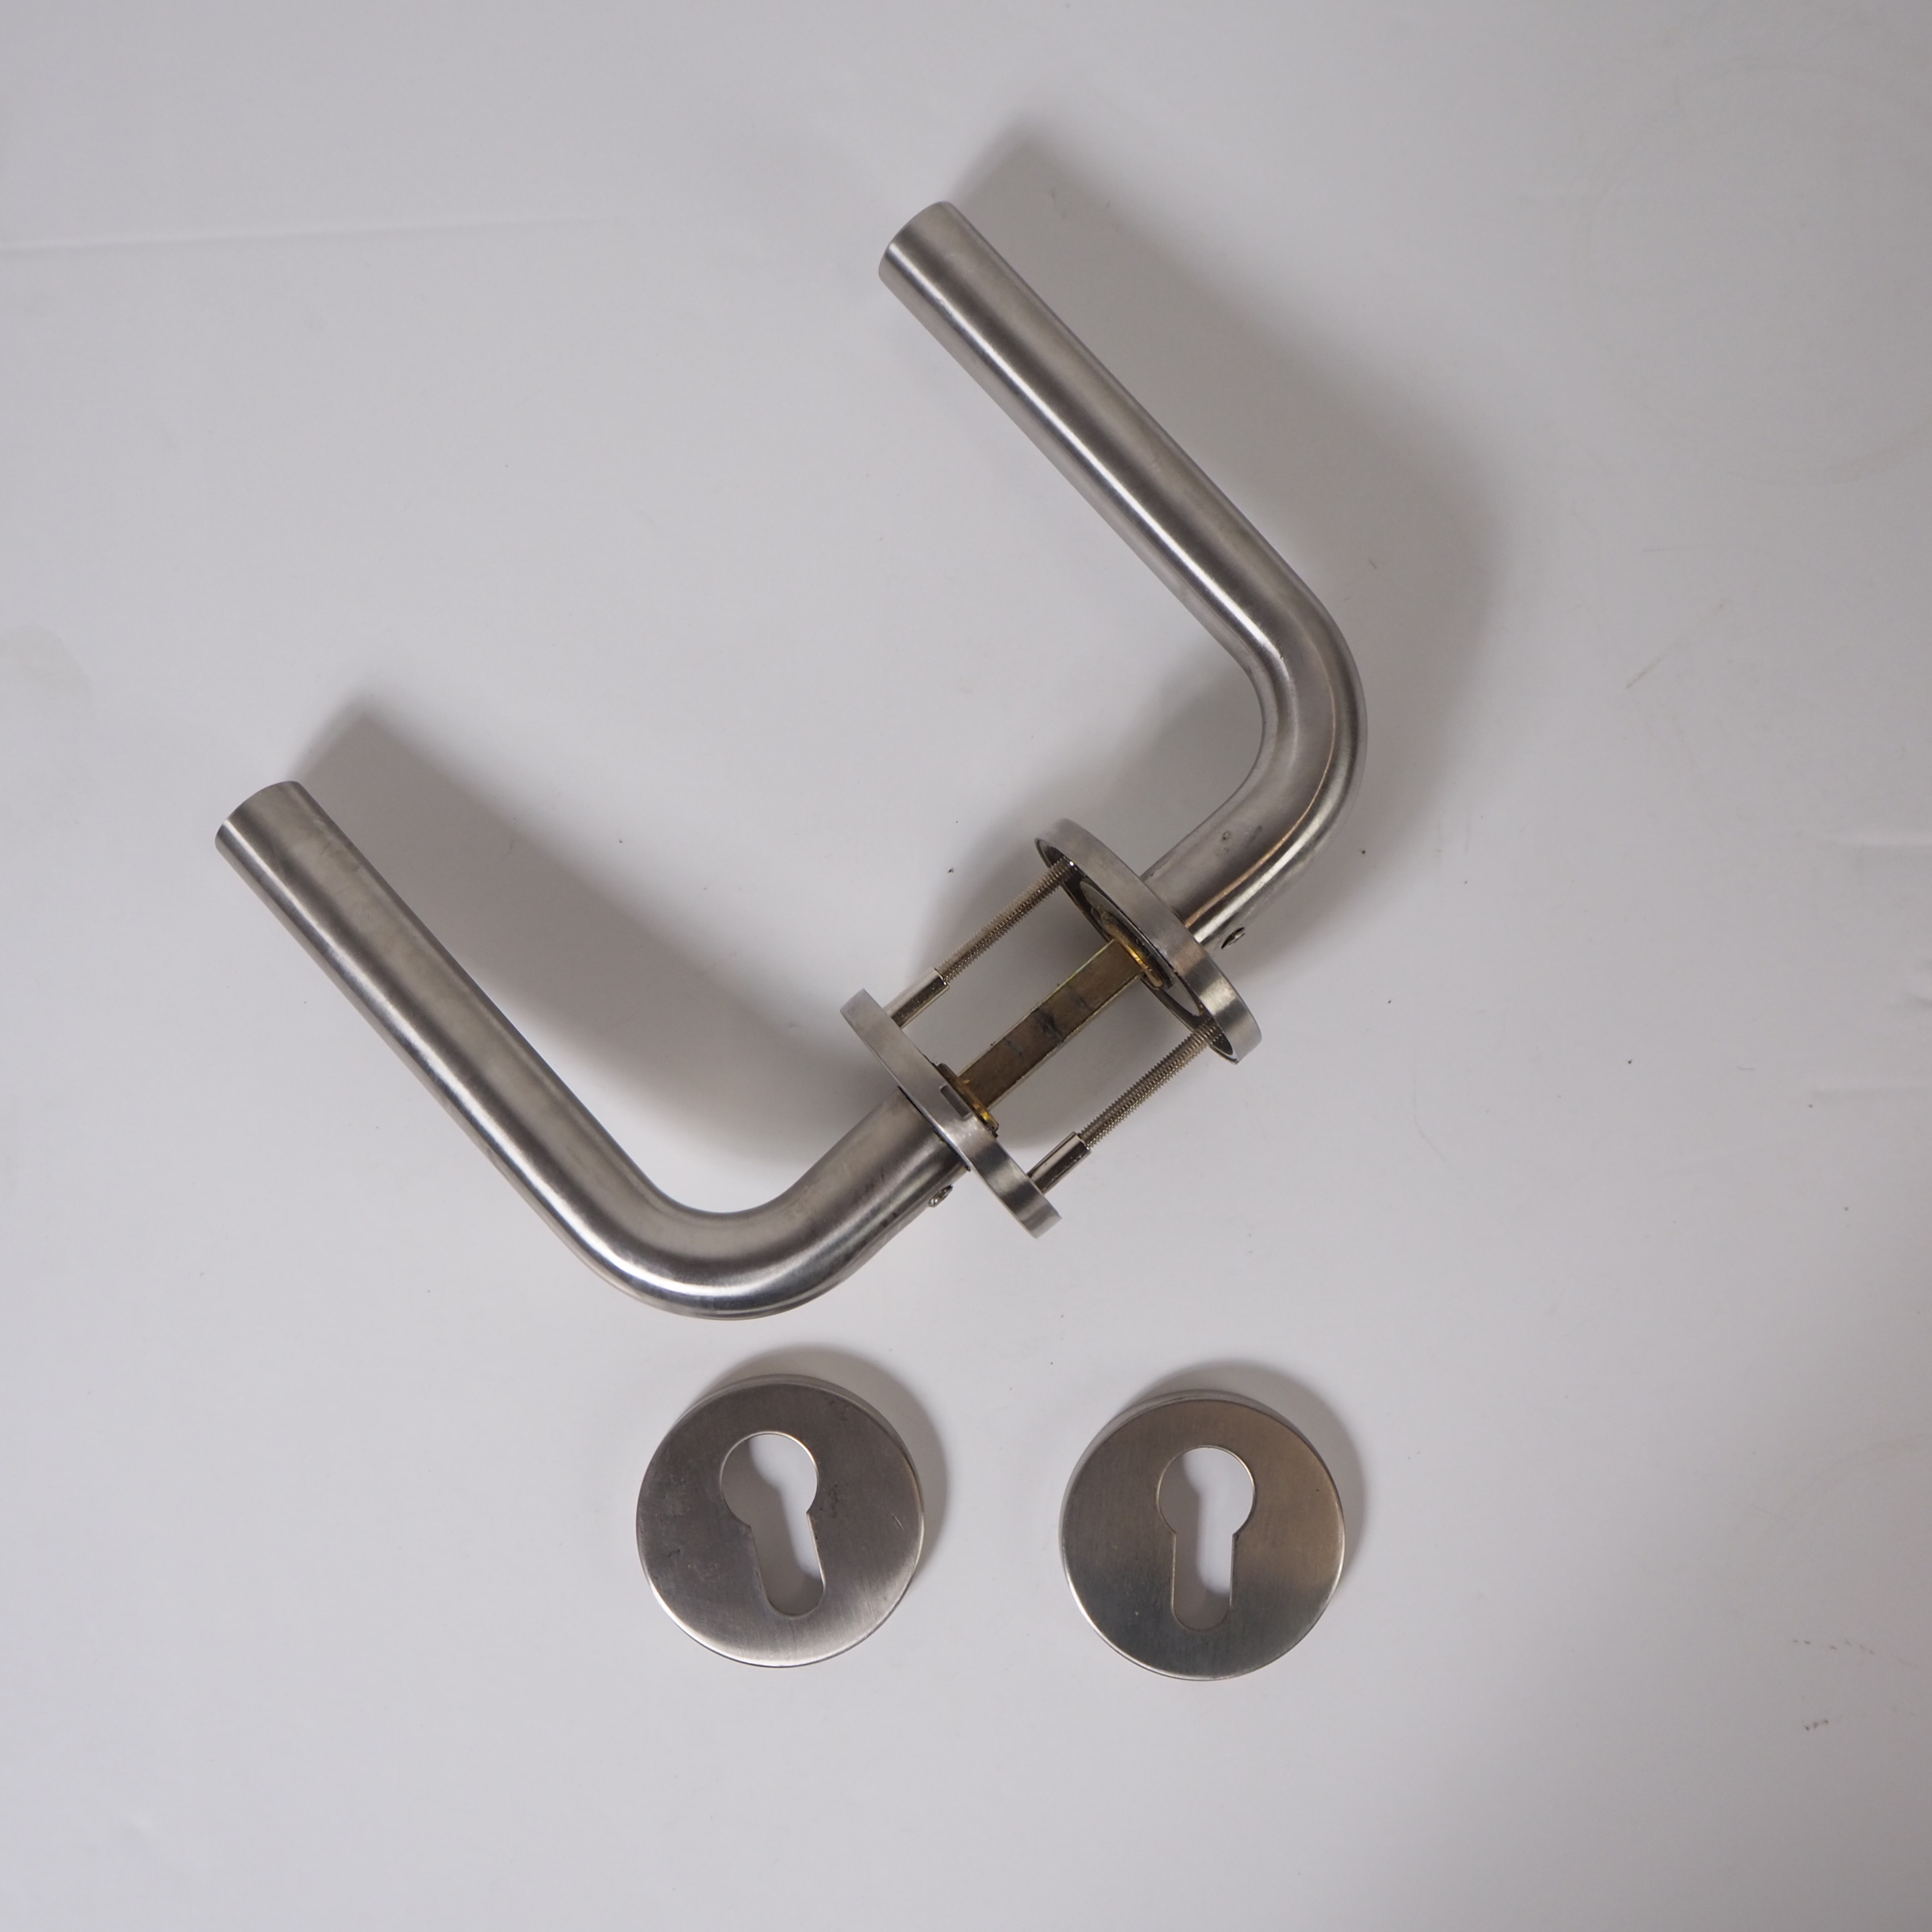 Stainless steel door handle with key rosettes